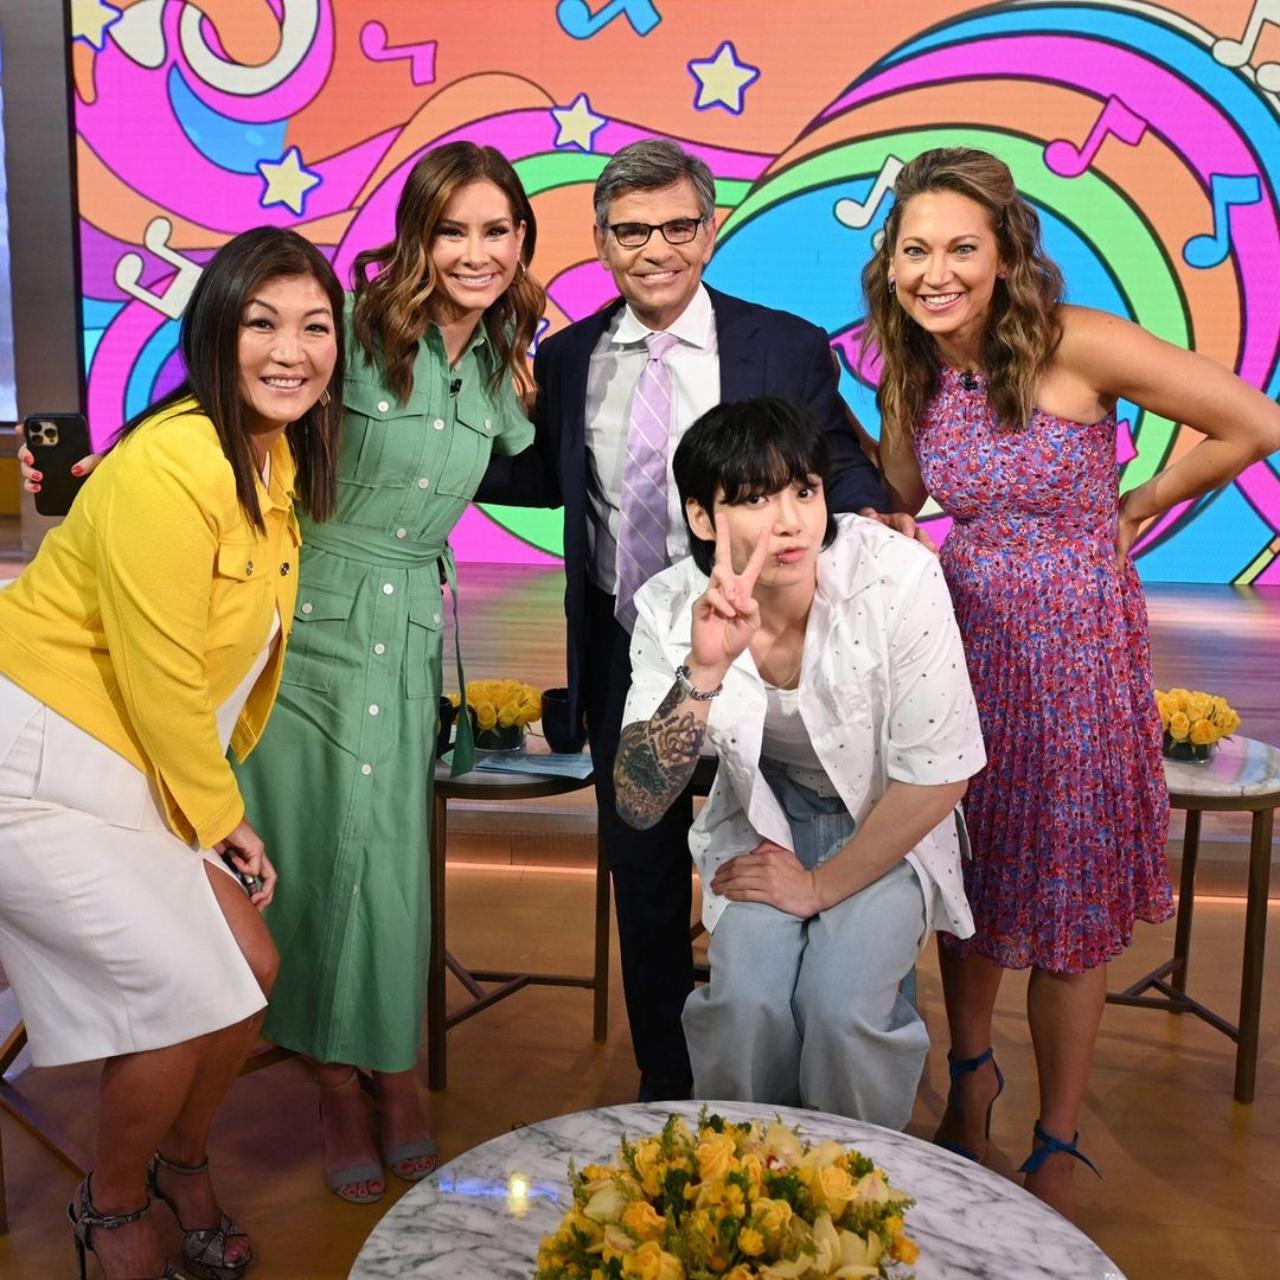 Jung Kook sat down with Good Morning America for an interview, providing insights into his and Latto's collaboration on 'Seven'